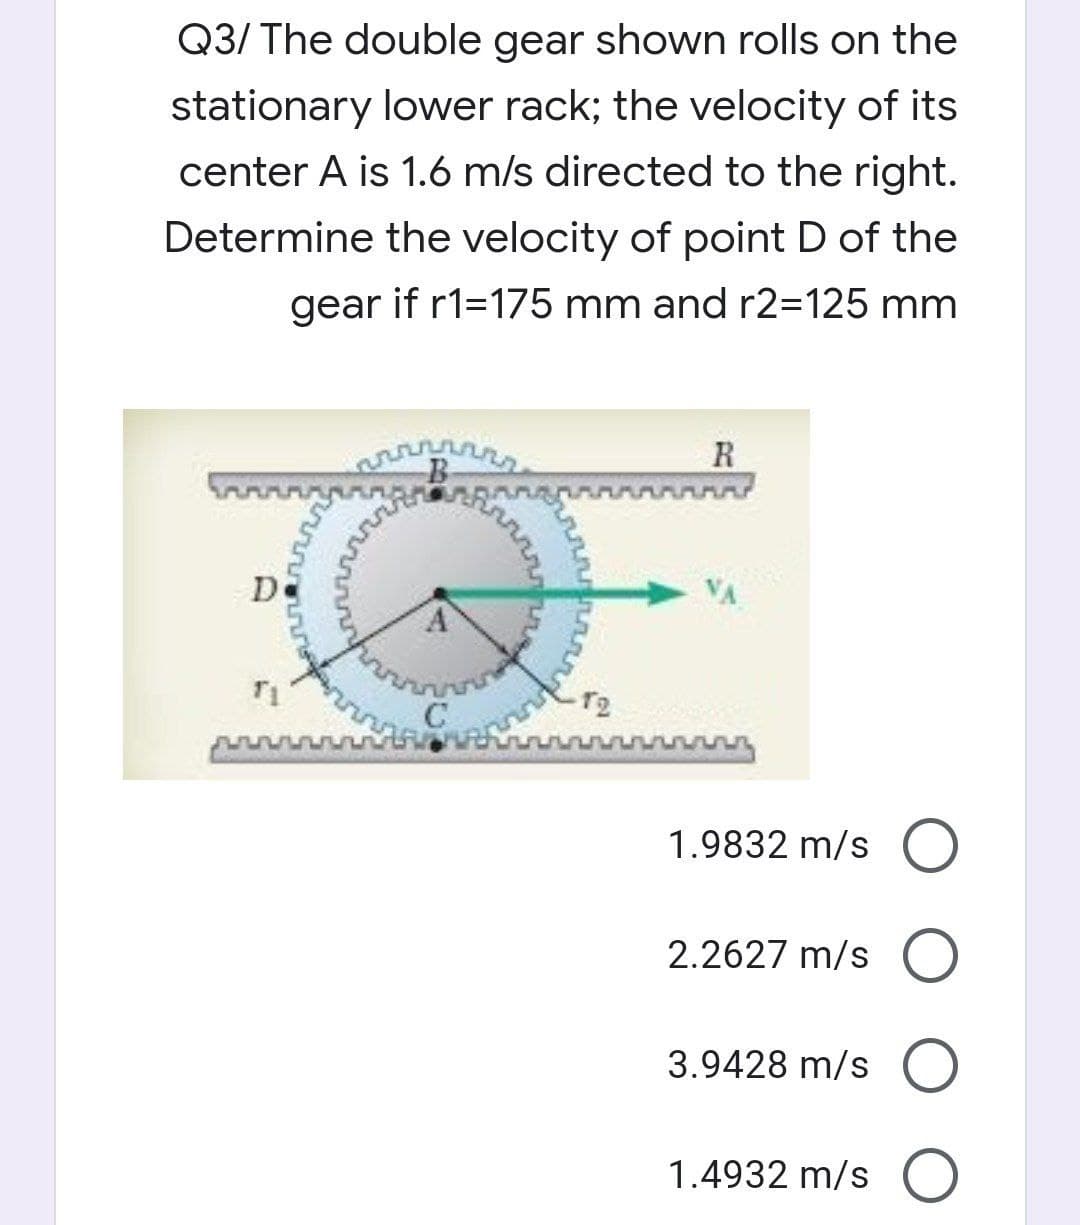 Q3/ The double gear shown rolls on the
stationary lower rack; the velocity of its
center A is 1.6 m/s directed to the right.
Determine the velocity of point D of the
gear if r1=175 mm and r2=125 mm
R
De
T2
1.9832 m/s O
2.2627 m/s O
3.9428 m/s O
1.4932 m/s O
